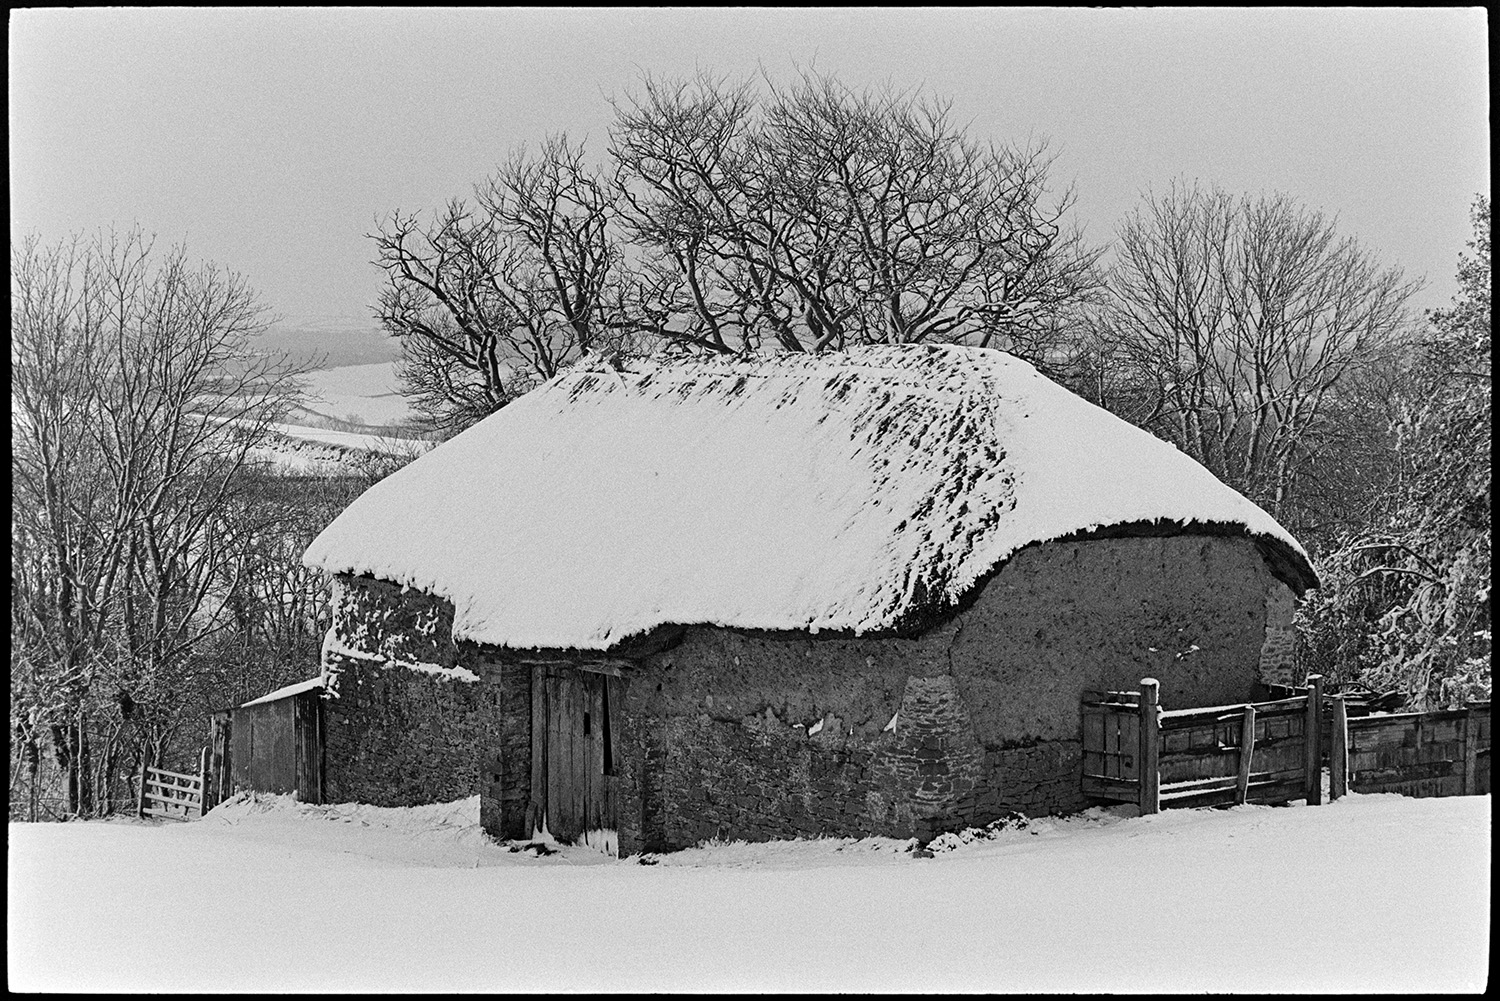 Snow, cob and thatched barn, now demolished. 
[A snow covered cob and thatched barn near Beaford Wood. It was later demolished.]